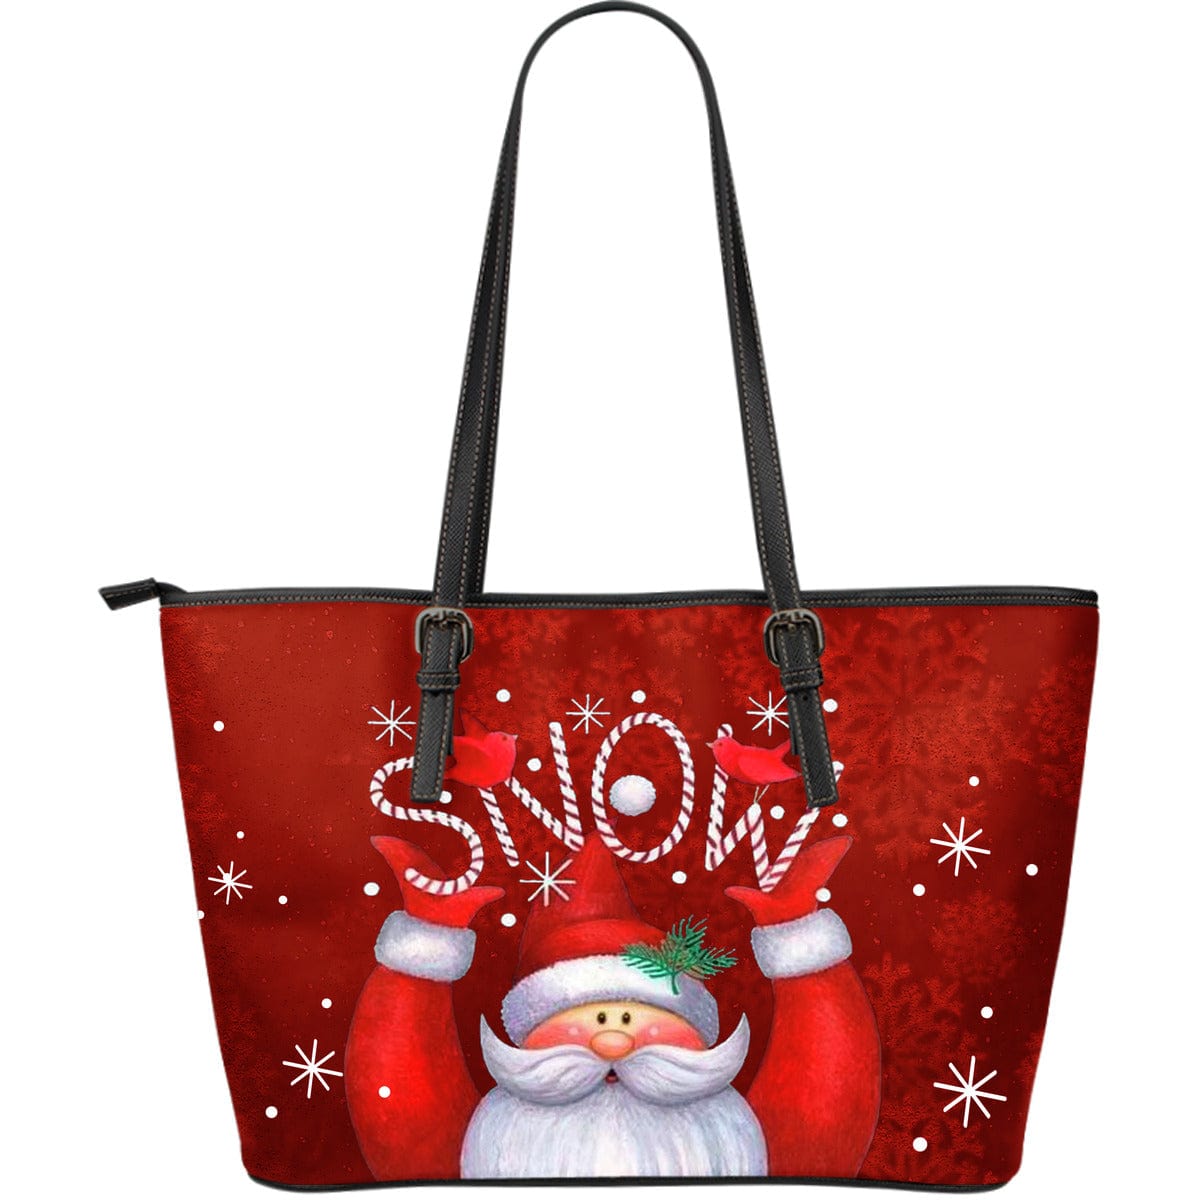 Large Leather Tote - Christmas Snowman - GiddyGoatStore